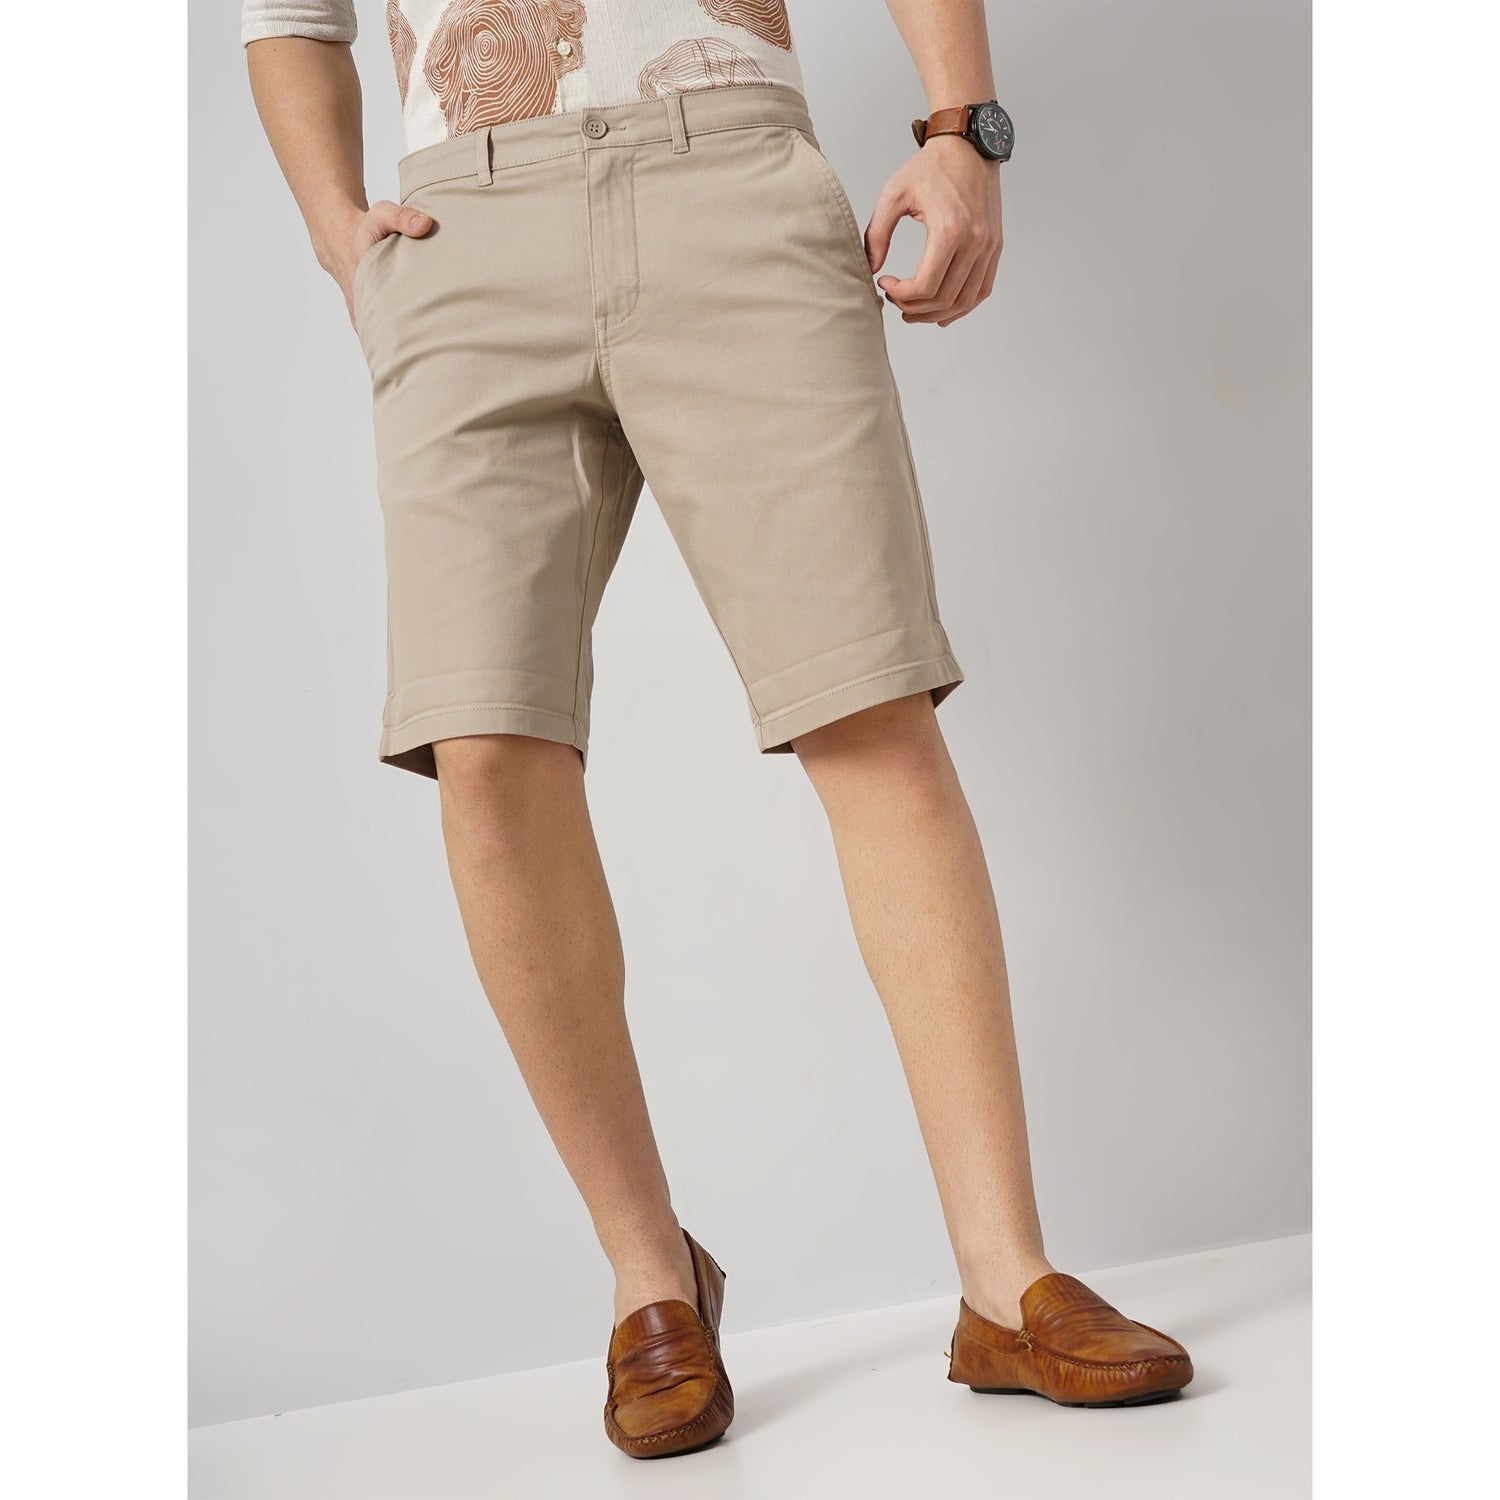 Men Beige Solid Loose Fit Cotton Chinos Casual Short (BOCHINOBM2)